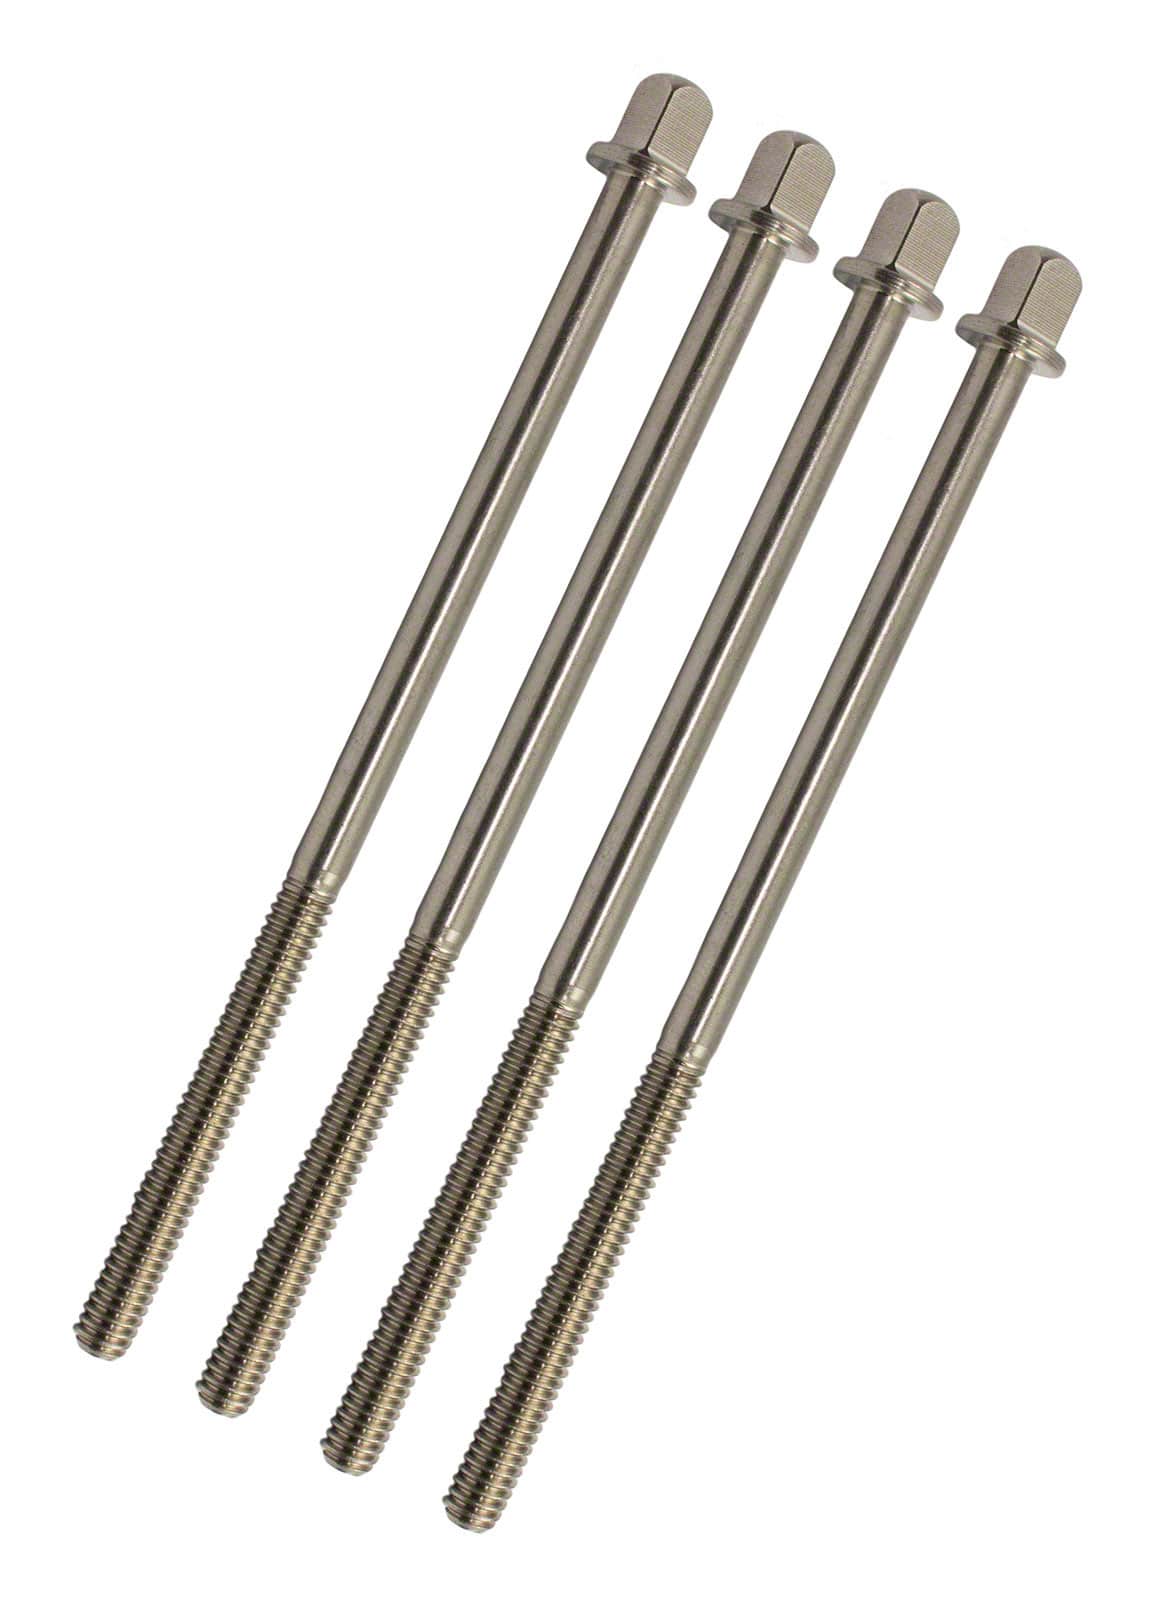 SPAREDRUM TRSS-110 - 110MM TENSION ROD - STAINLESS STEEL - 7/32